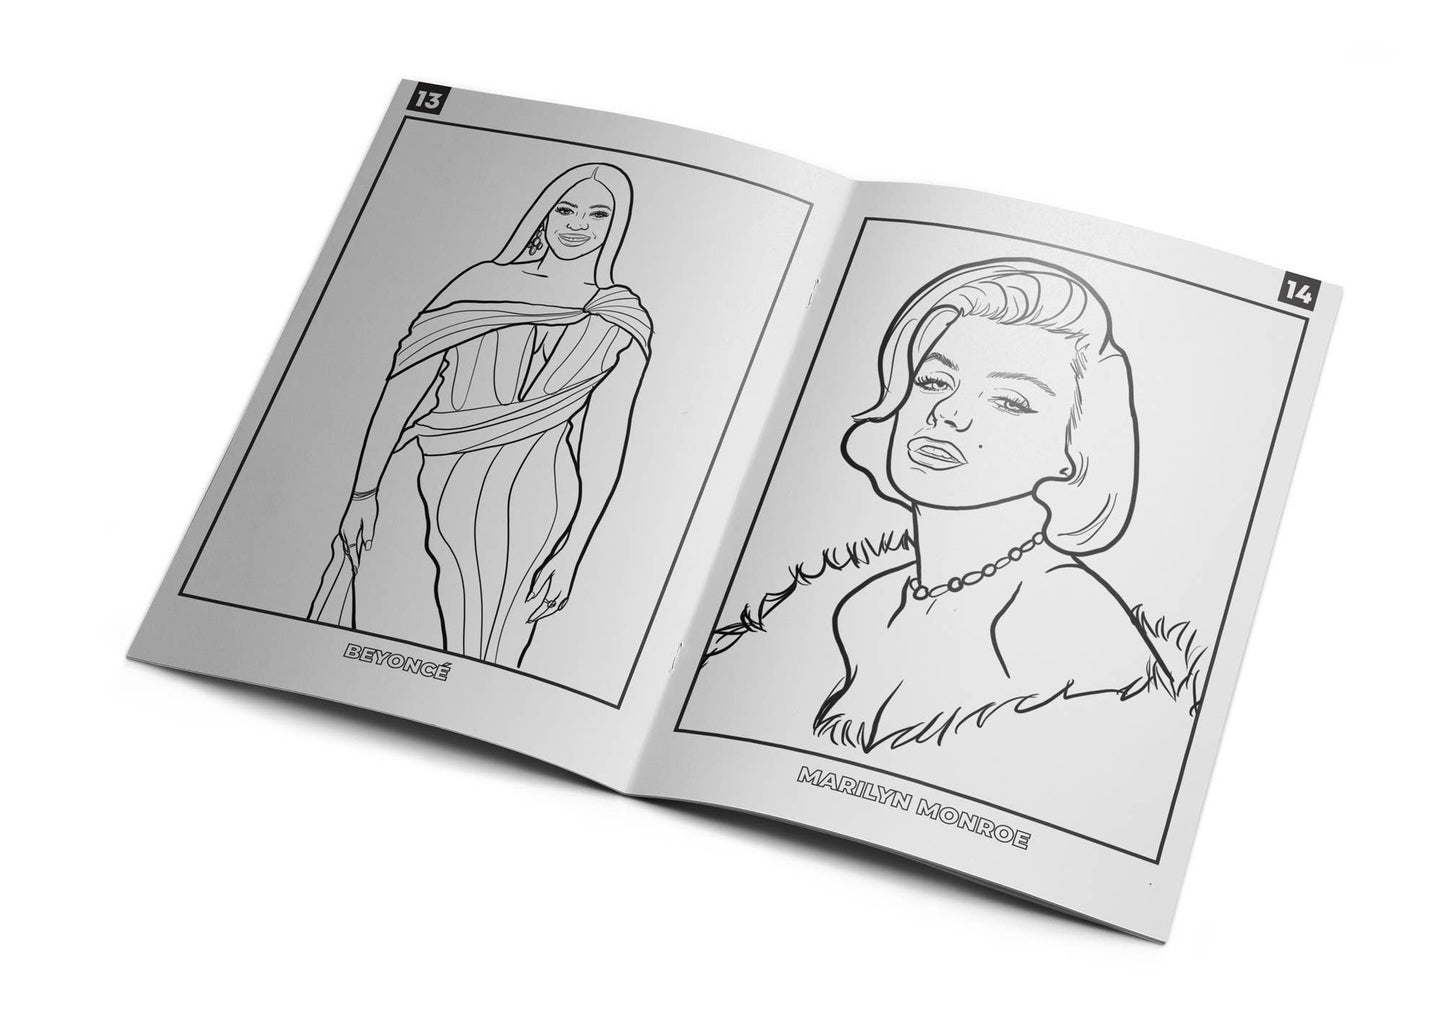 Iconic Women Activity Coloring Book